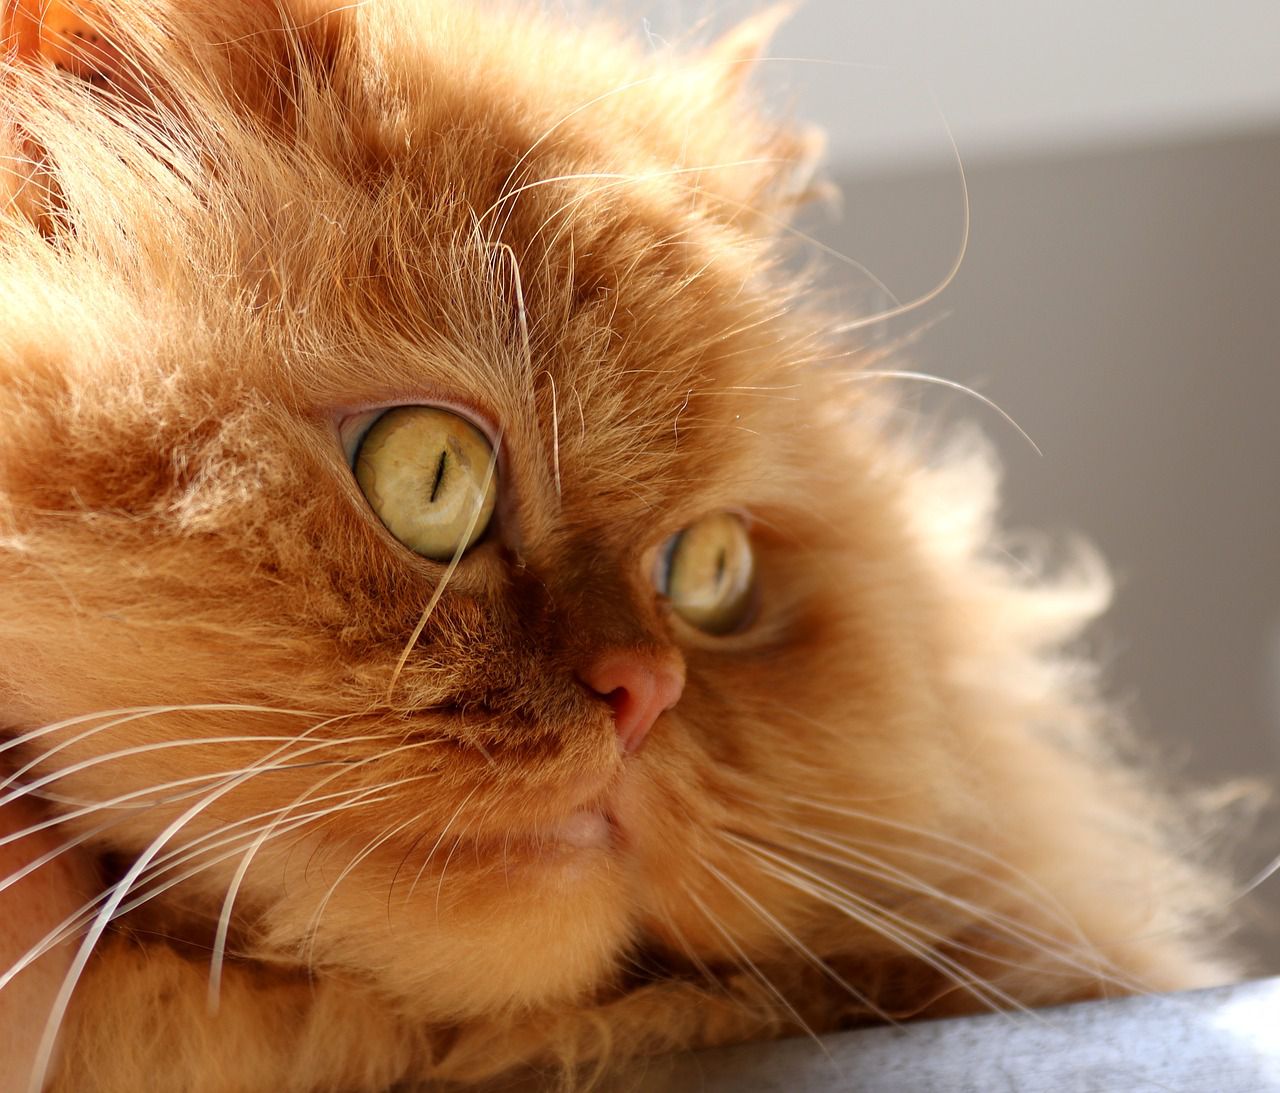 Ever Wondered if Cats Sweat? Find Out Here!